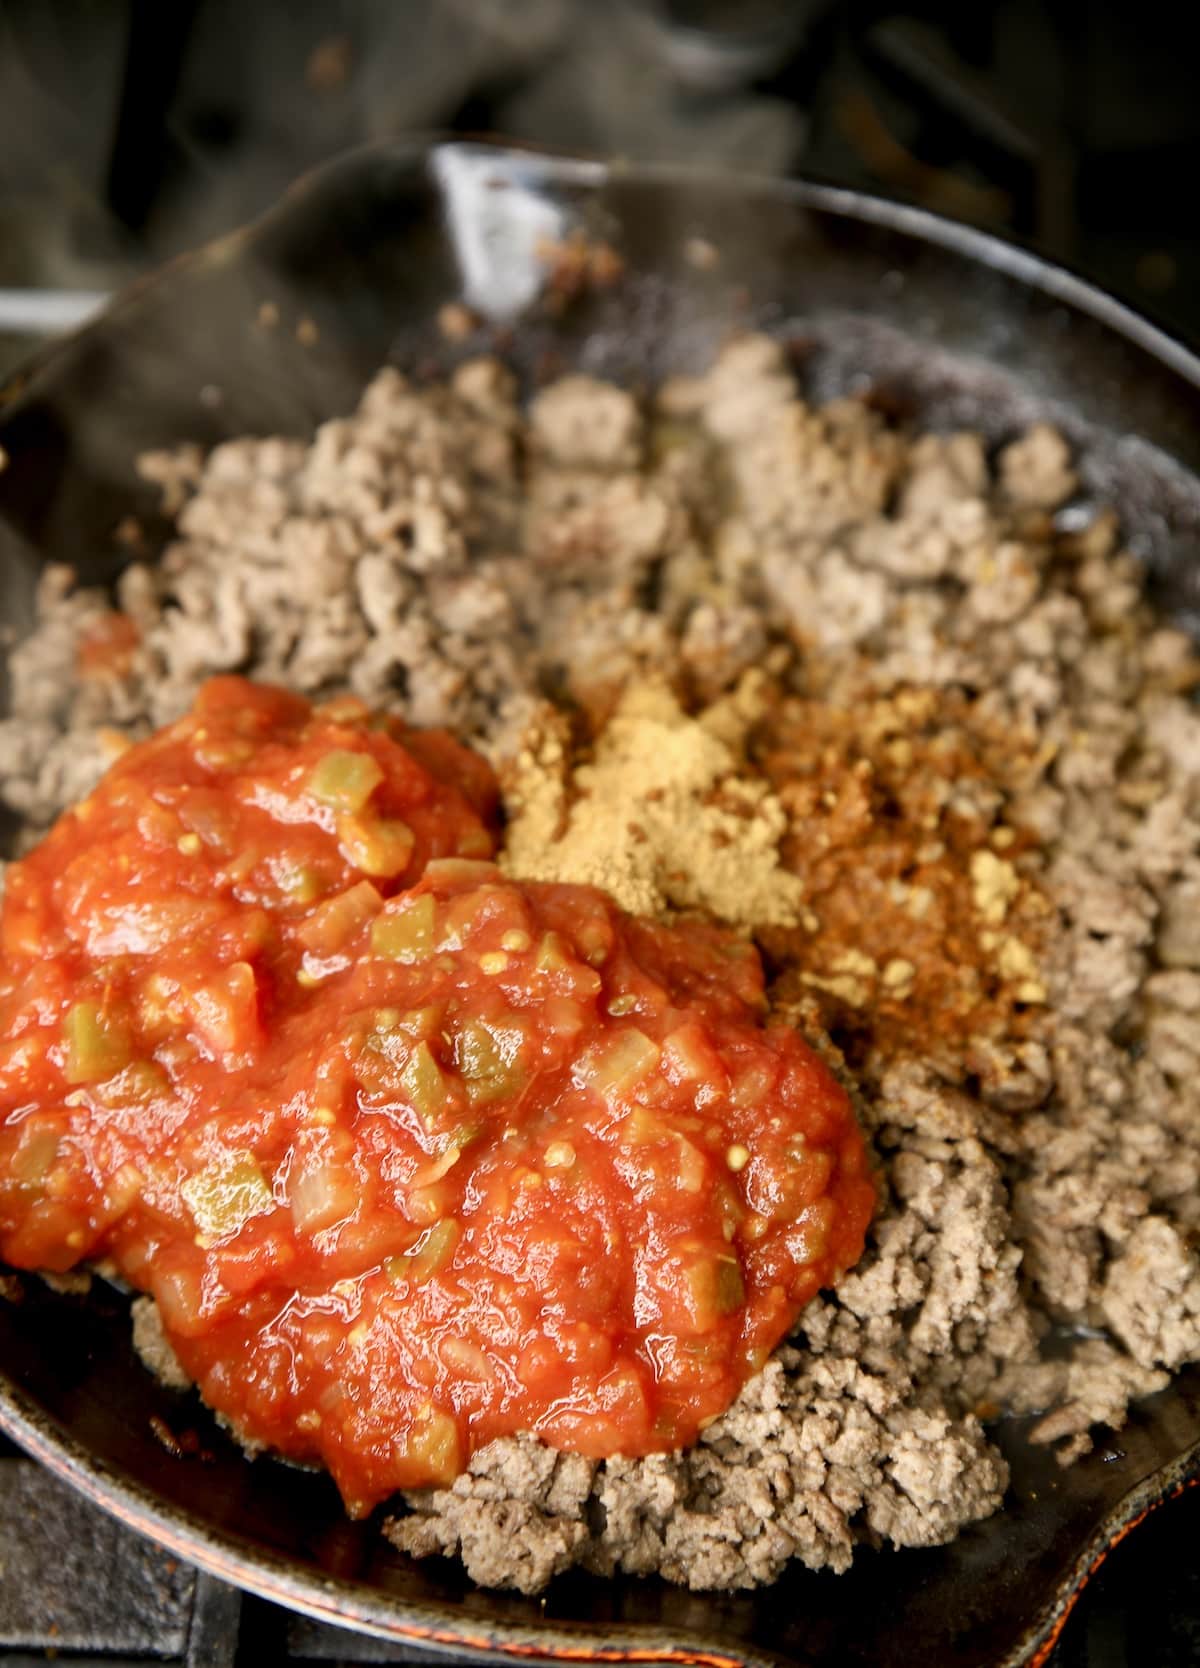 Ground beef in a skillet with taco seasoning and salsa.